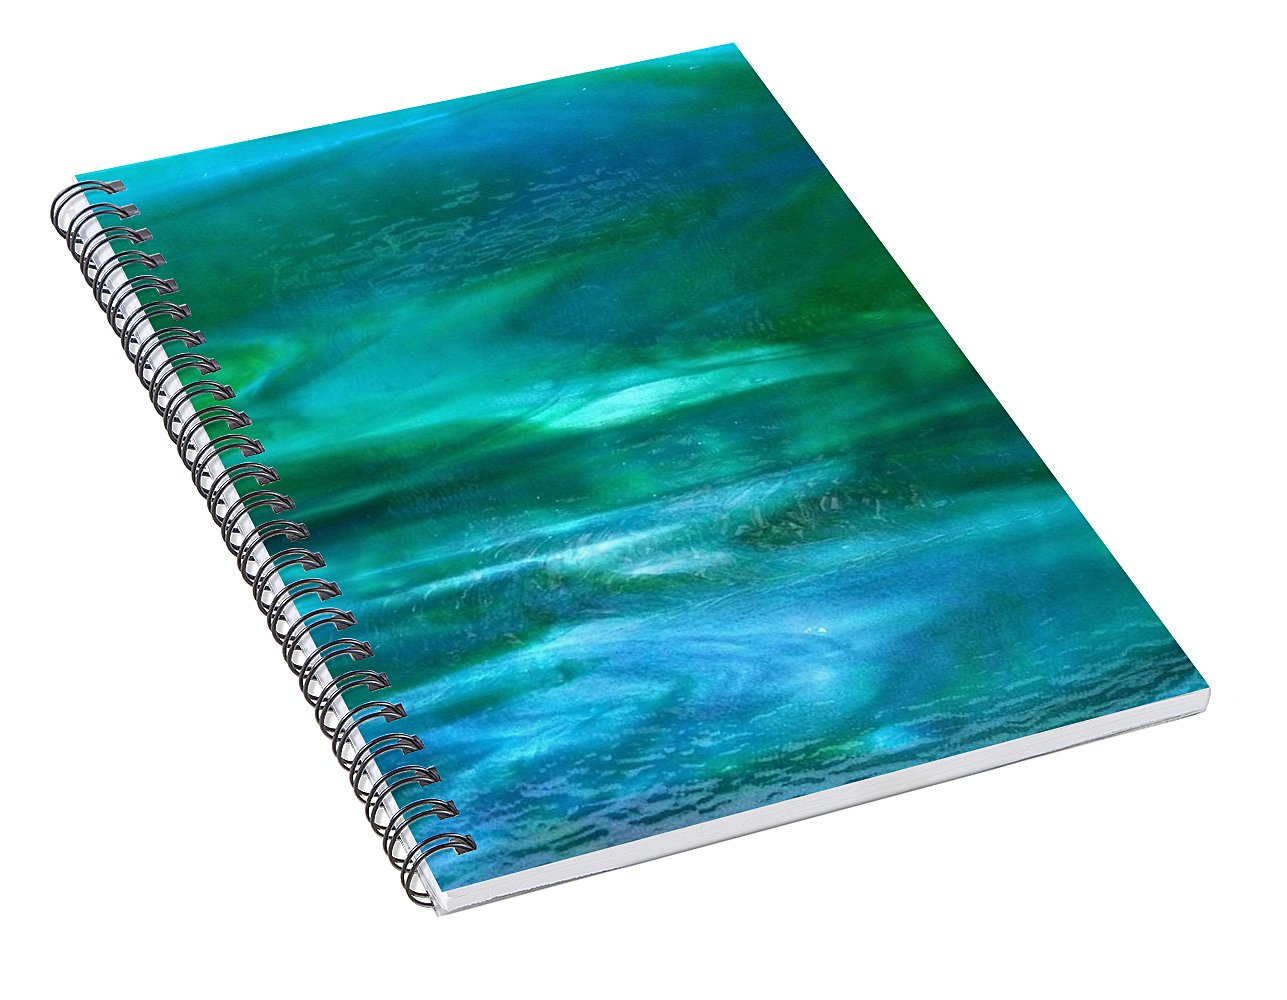 Whispers of Summer - No Overlay - Spiral Notebook